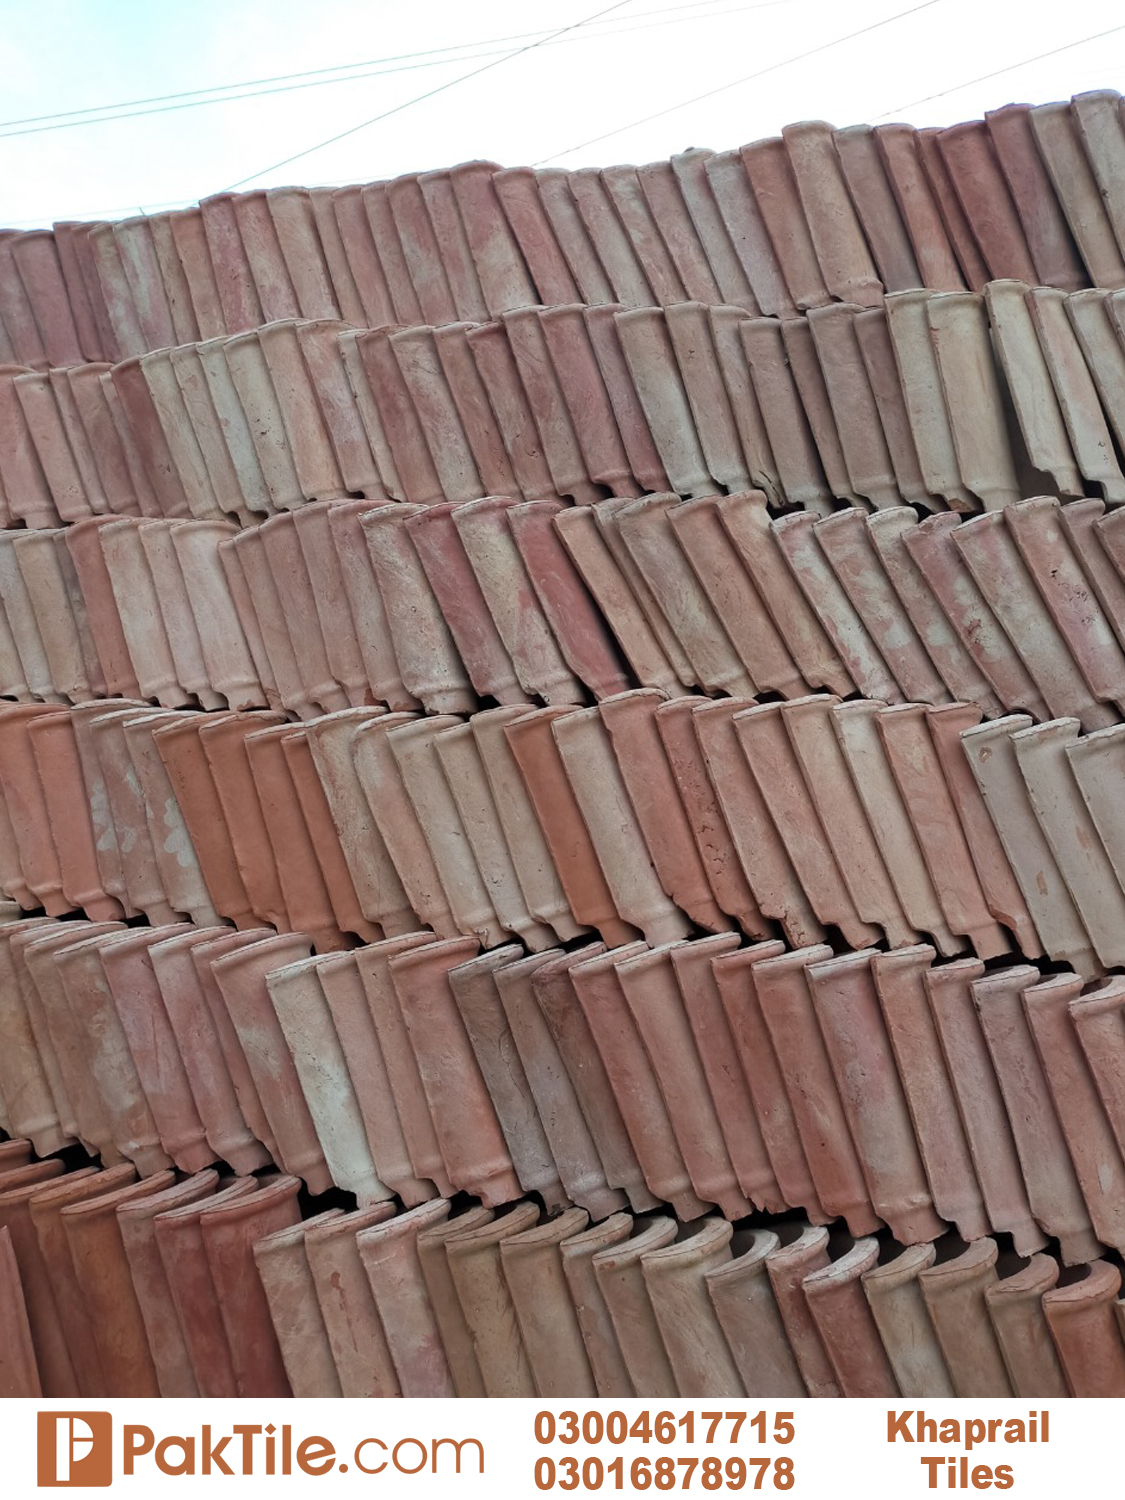 7 Natural Clay Industry Khaprail Tiles Near Me